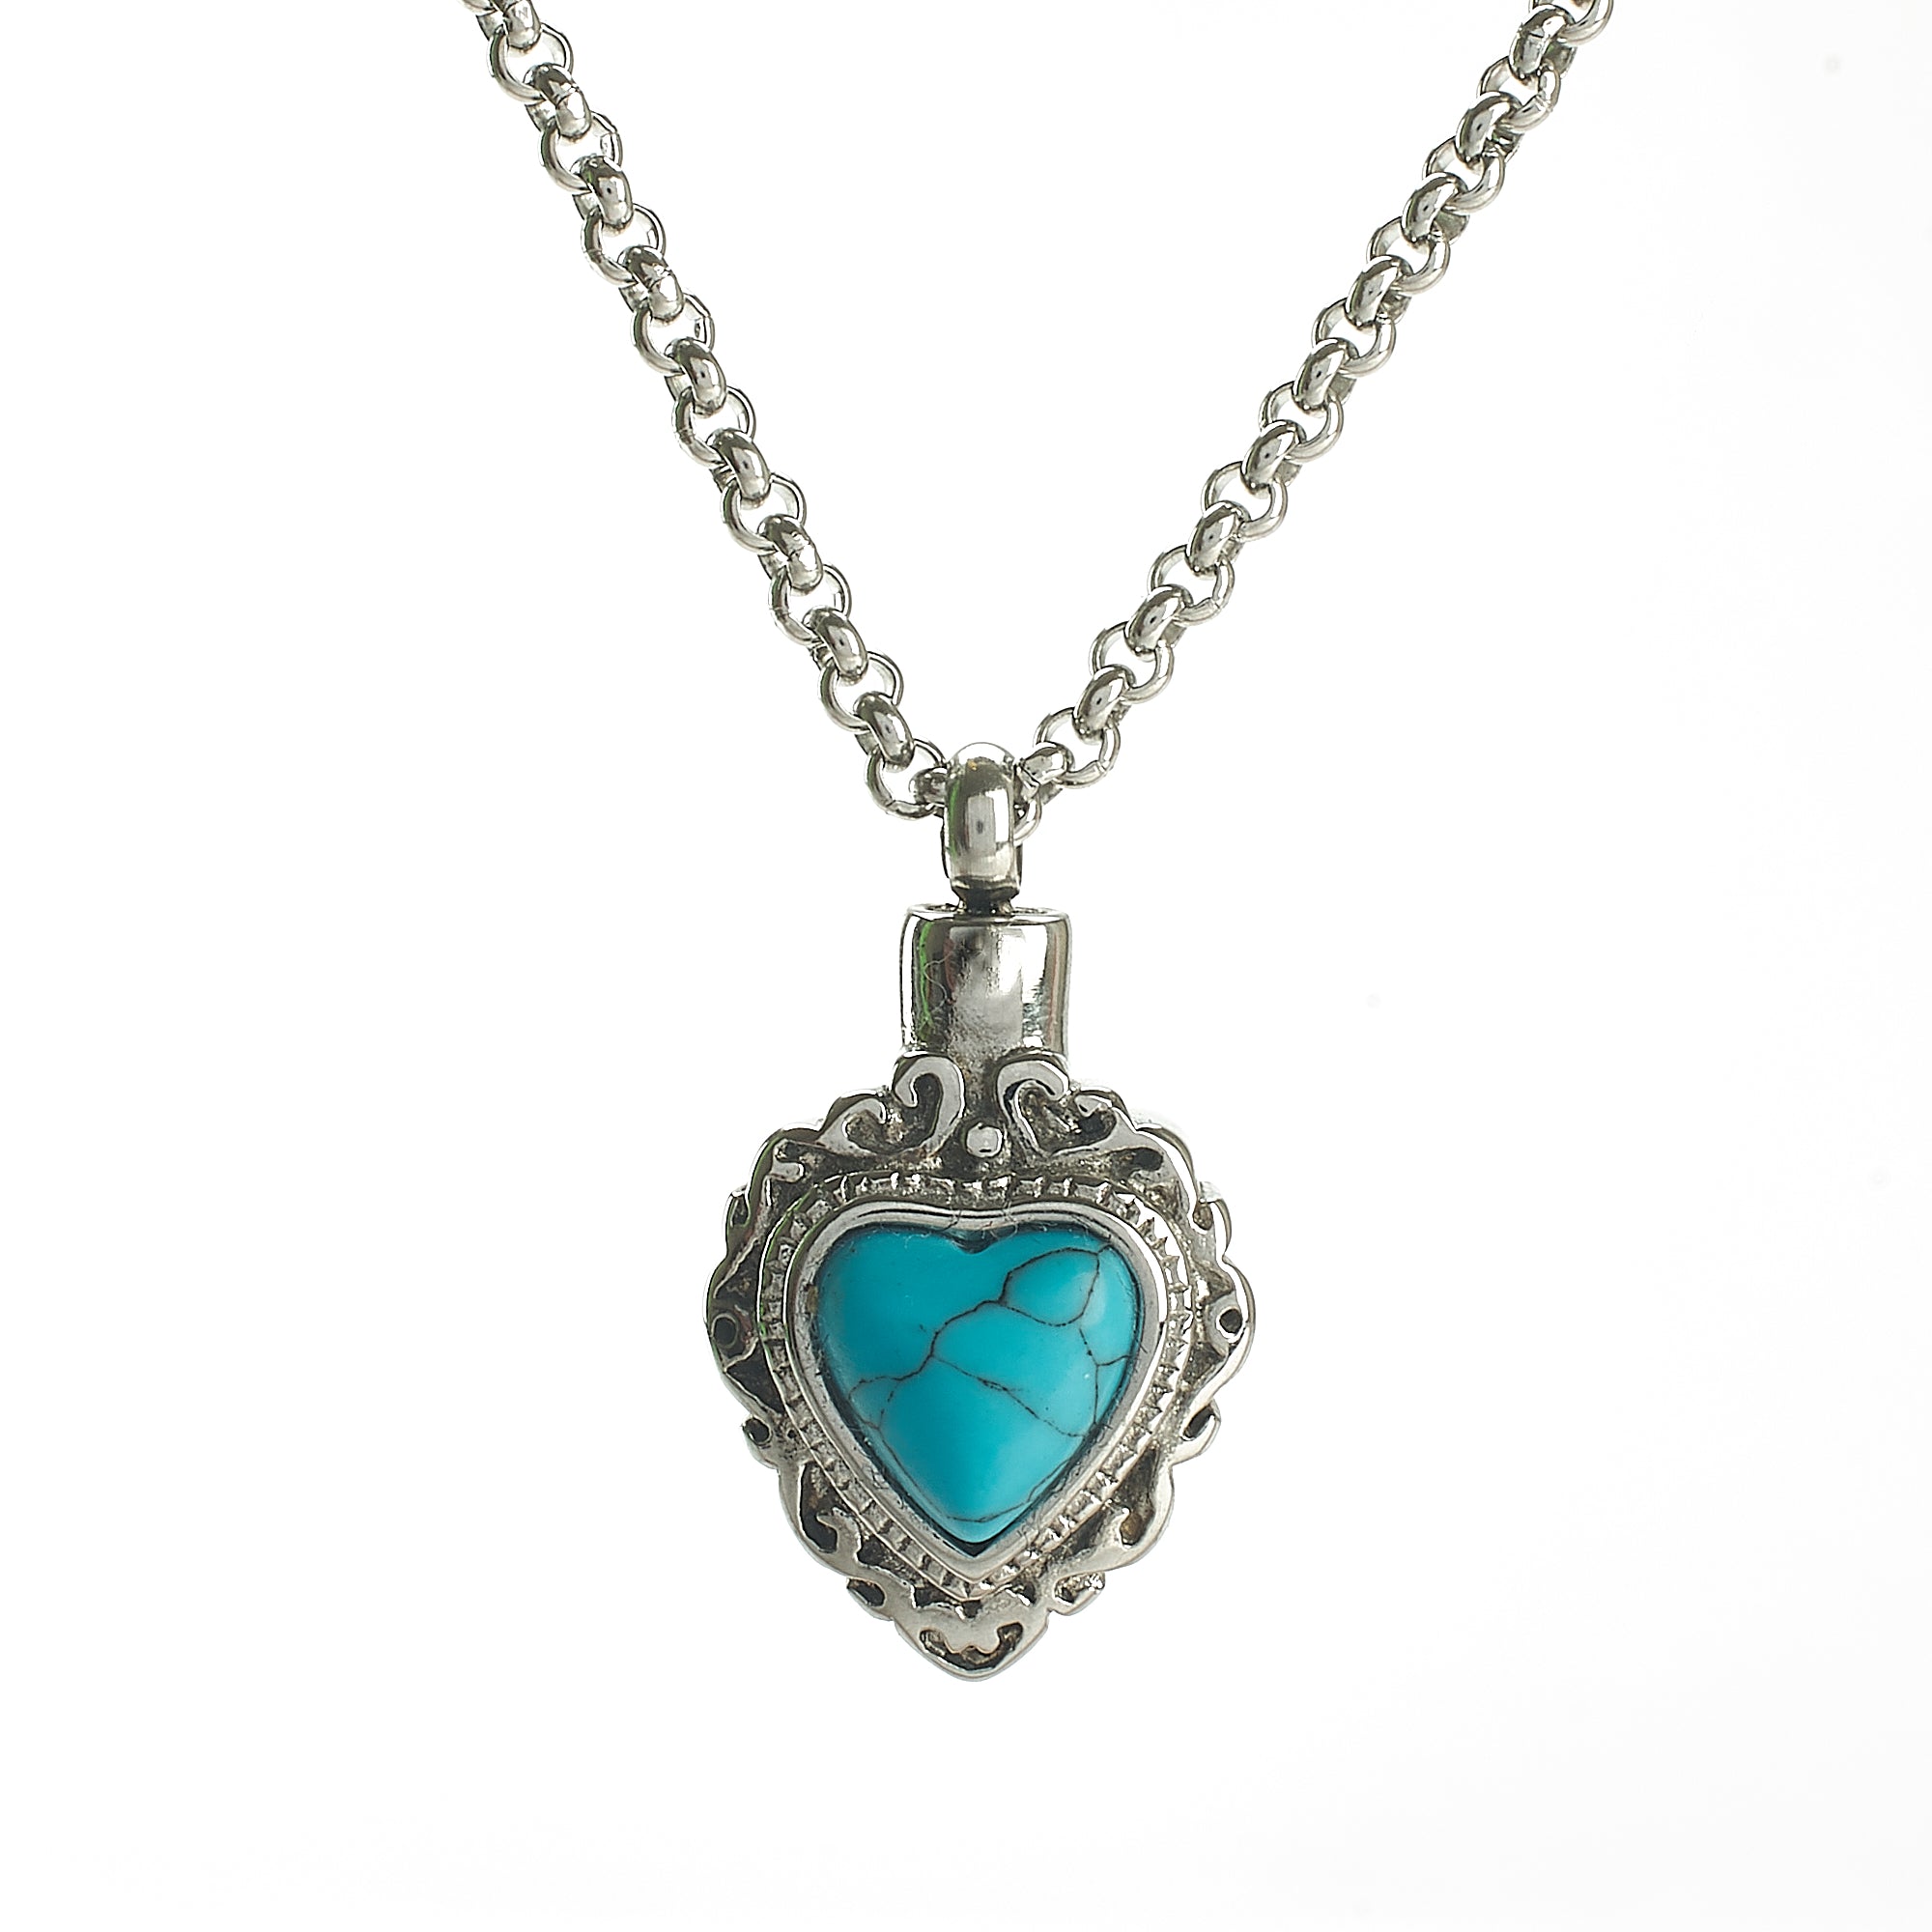 Cremation Pendant - Turquoise - Decorative Small Silver Heart